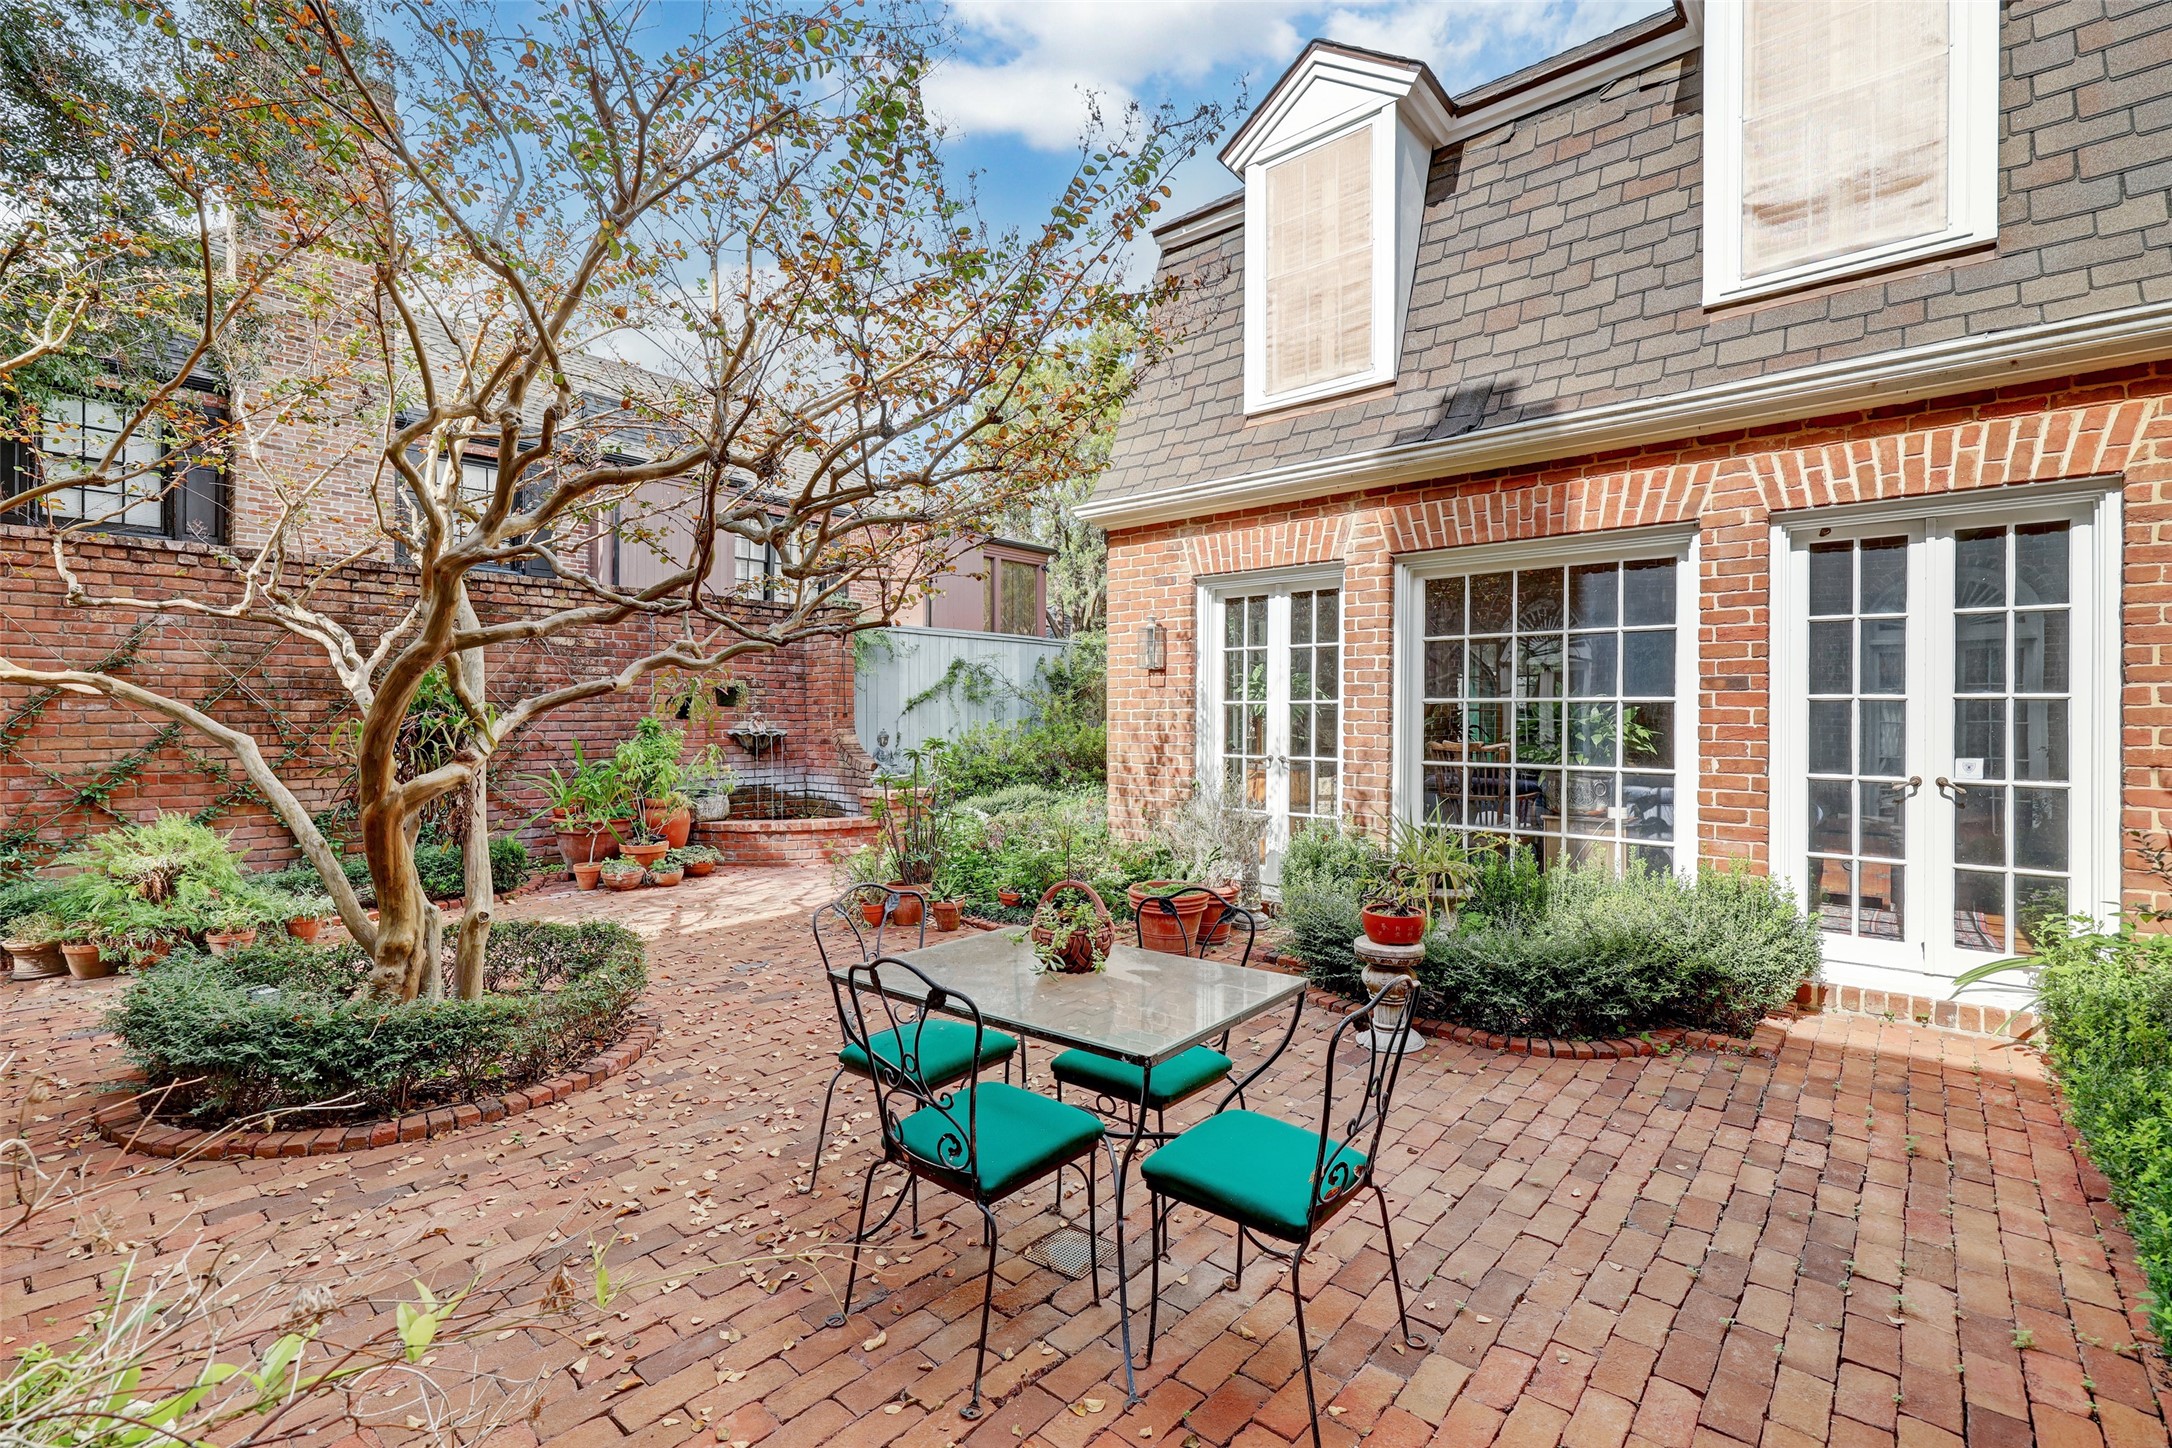 The first of two rear courtyards is nestled between the wings of the formal living room and the den and boasts a charming brick patio, tasteful landscaping and a fountain, making it a perfect spot for quiet contemplation or social gatherings.